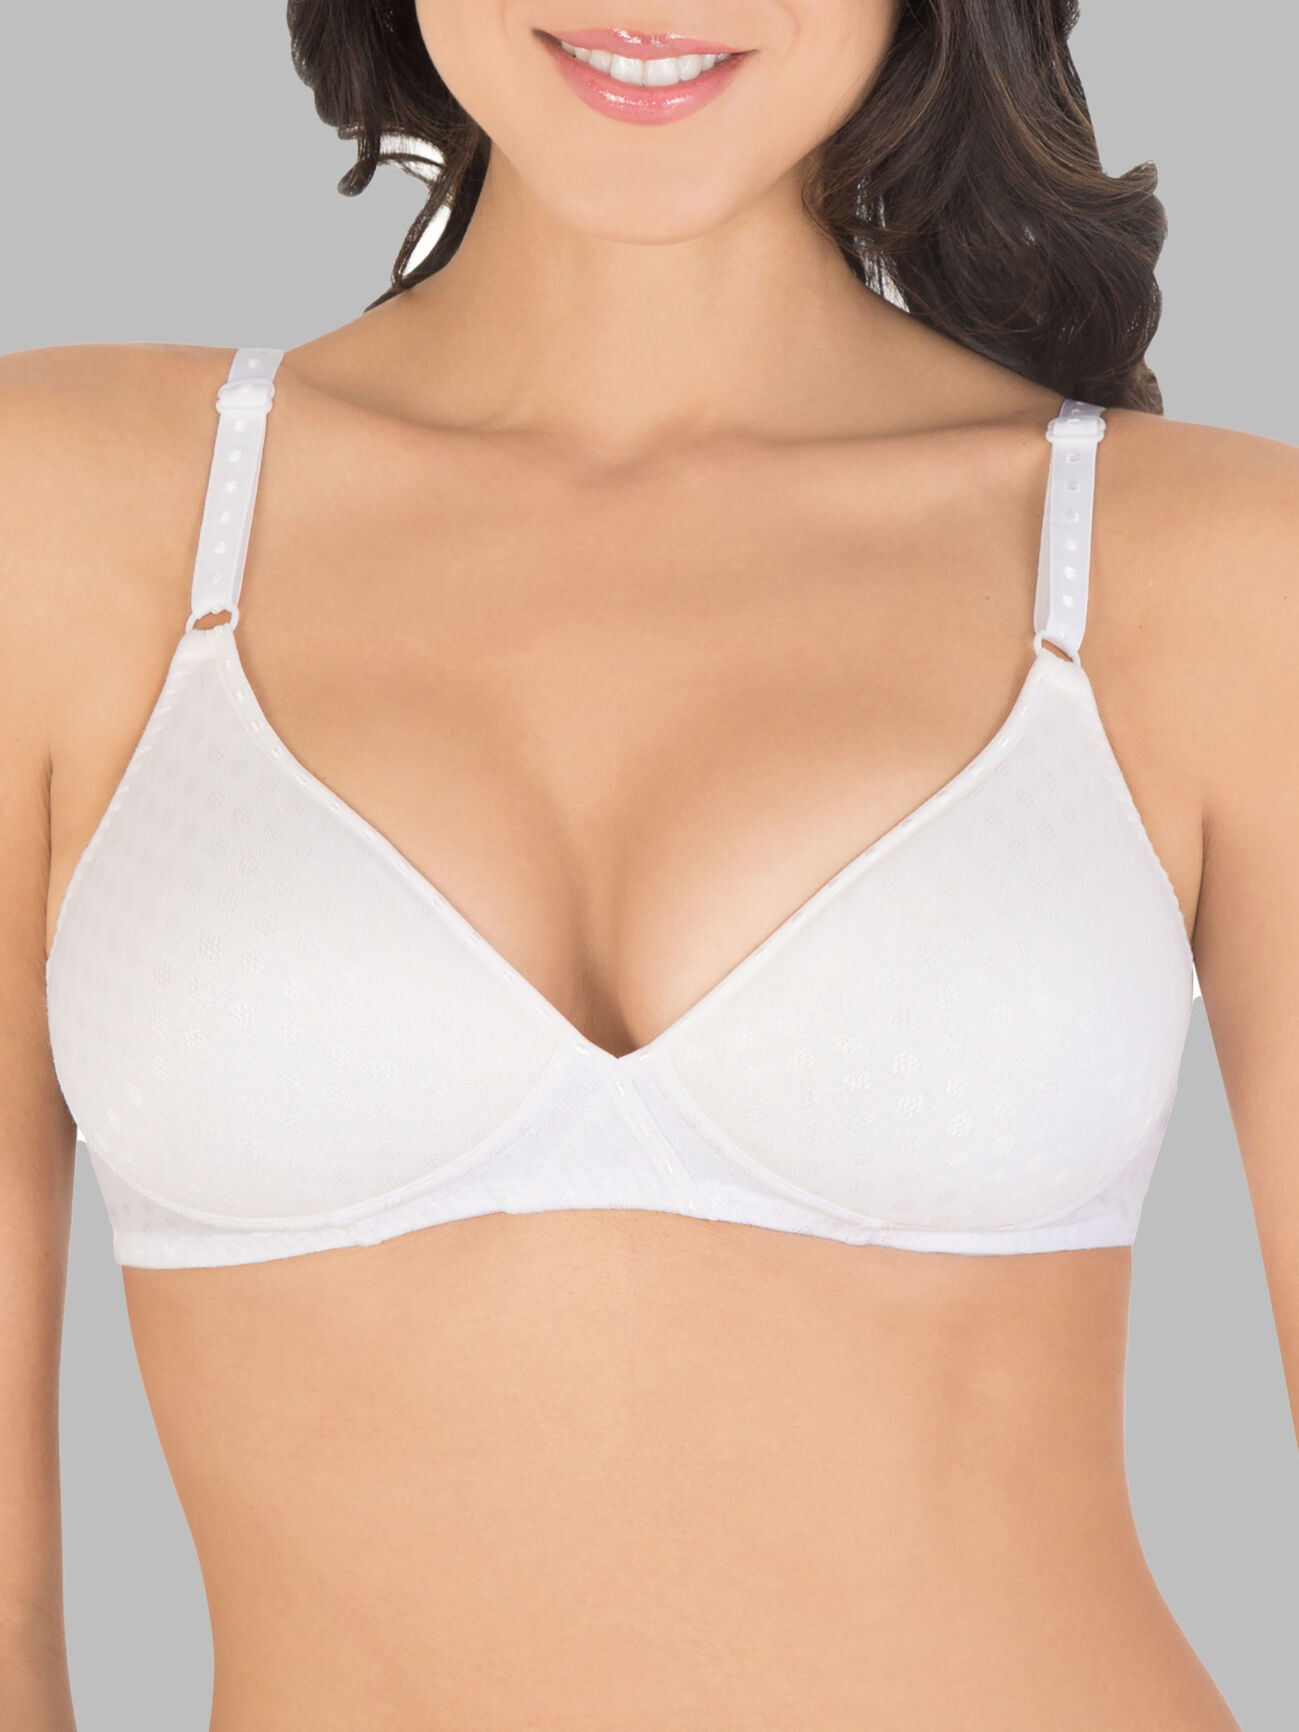 Buy Stars and Yoy Comfortable 100% Cotton Bra Fit for Cup Size B and C  (Pack of 2) (B, 30) White at